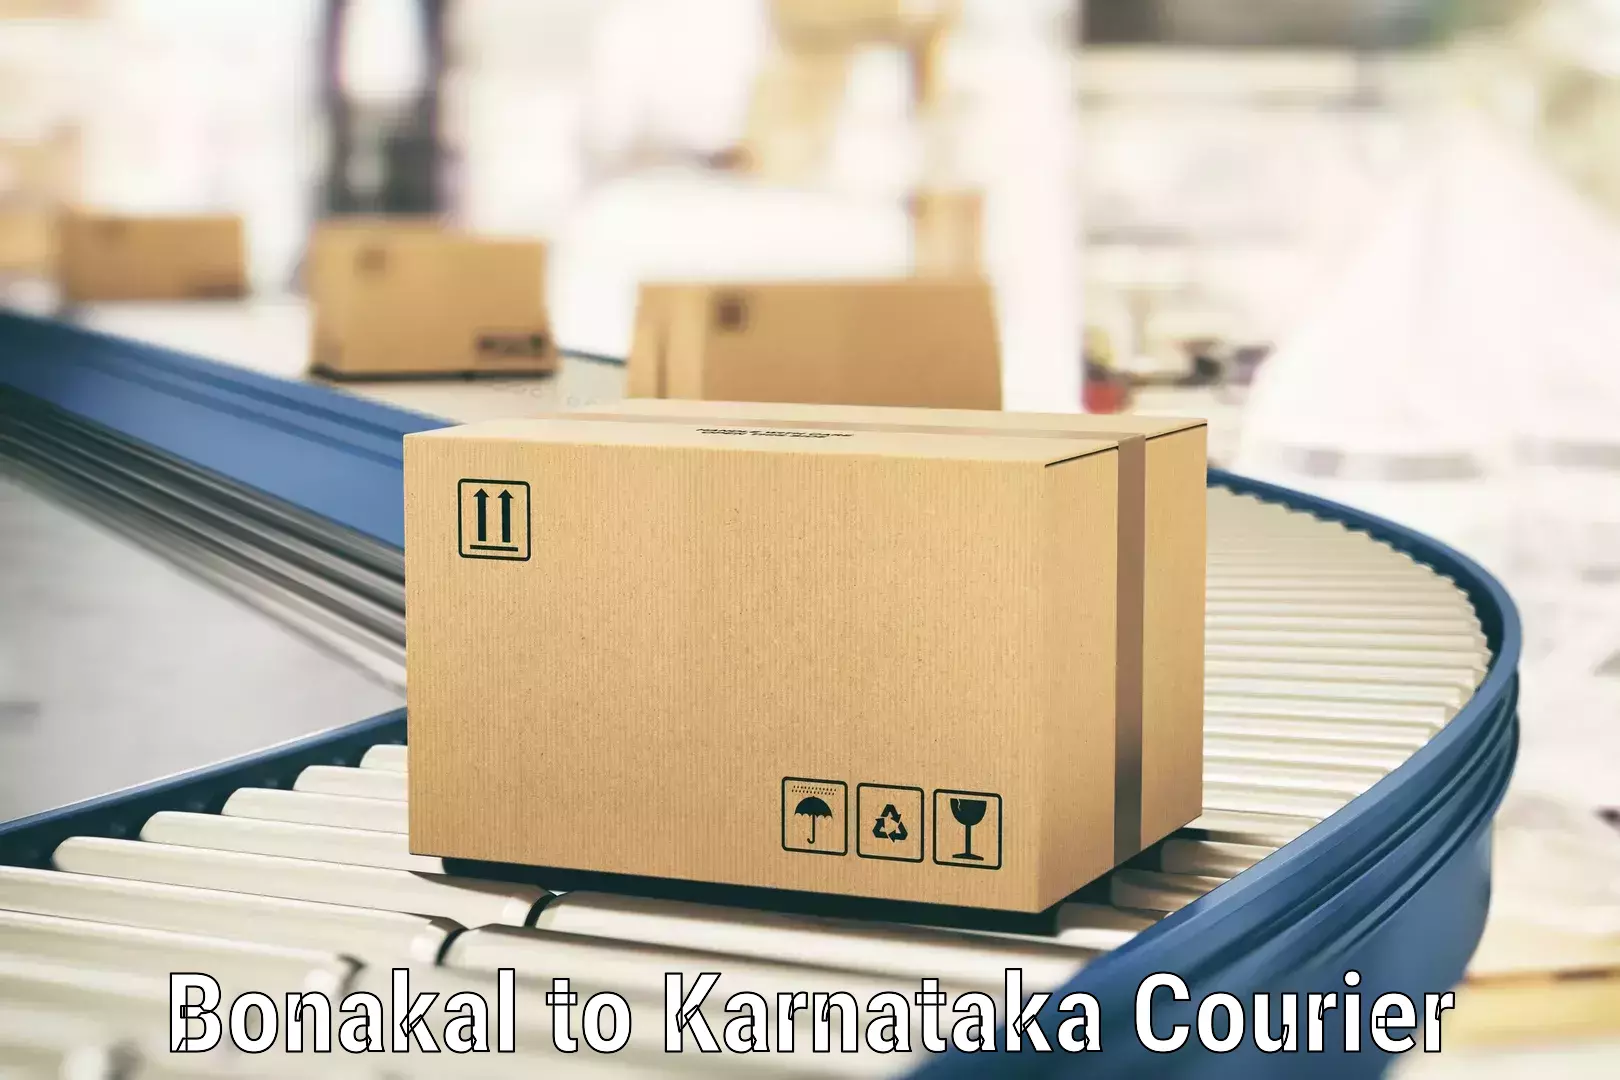 Reliable delivery network Bonakal to Rona Gadag